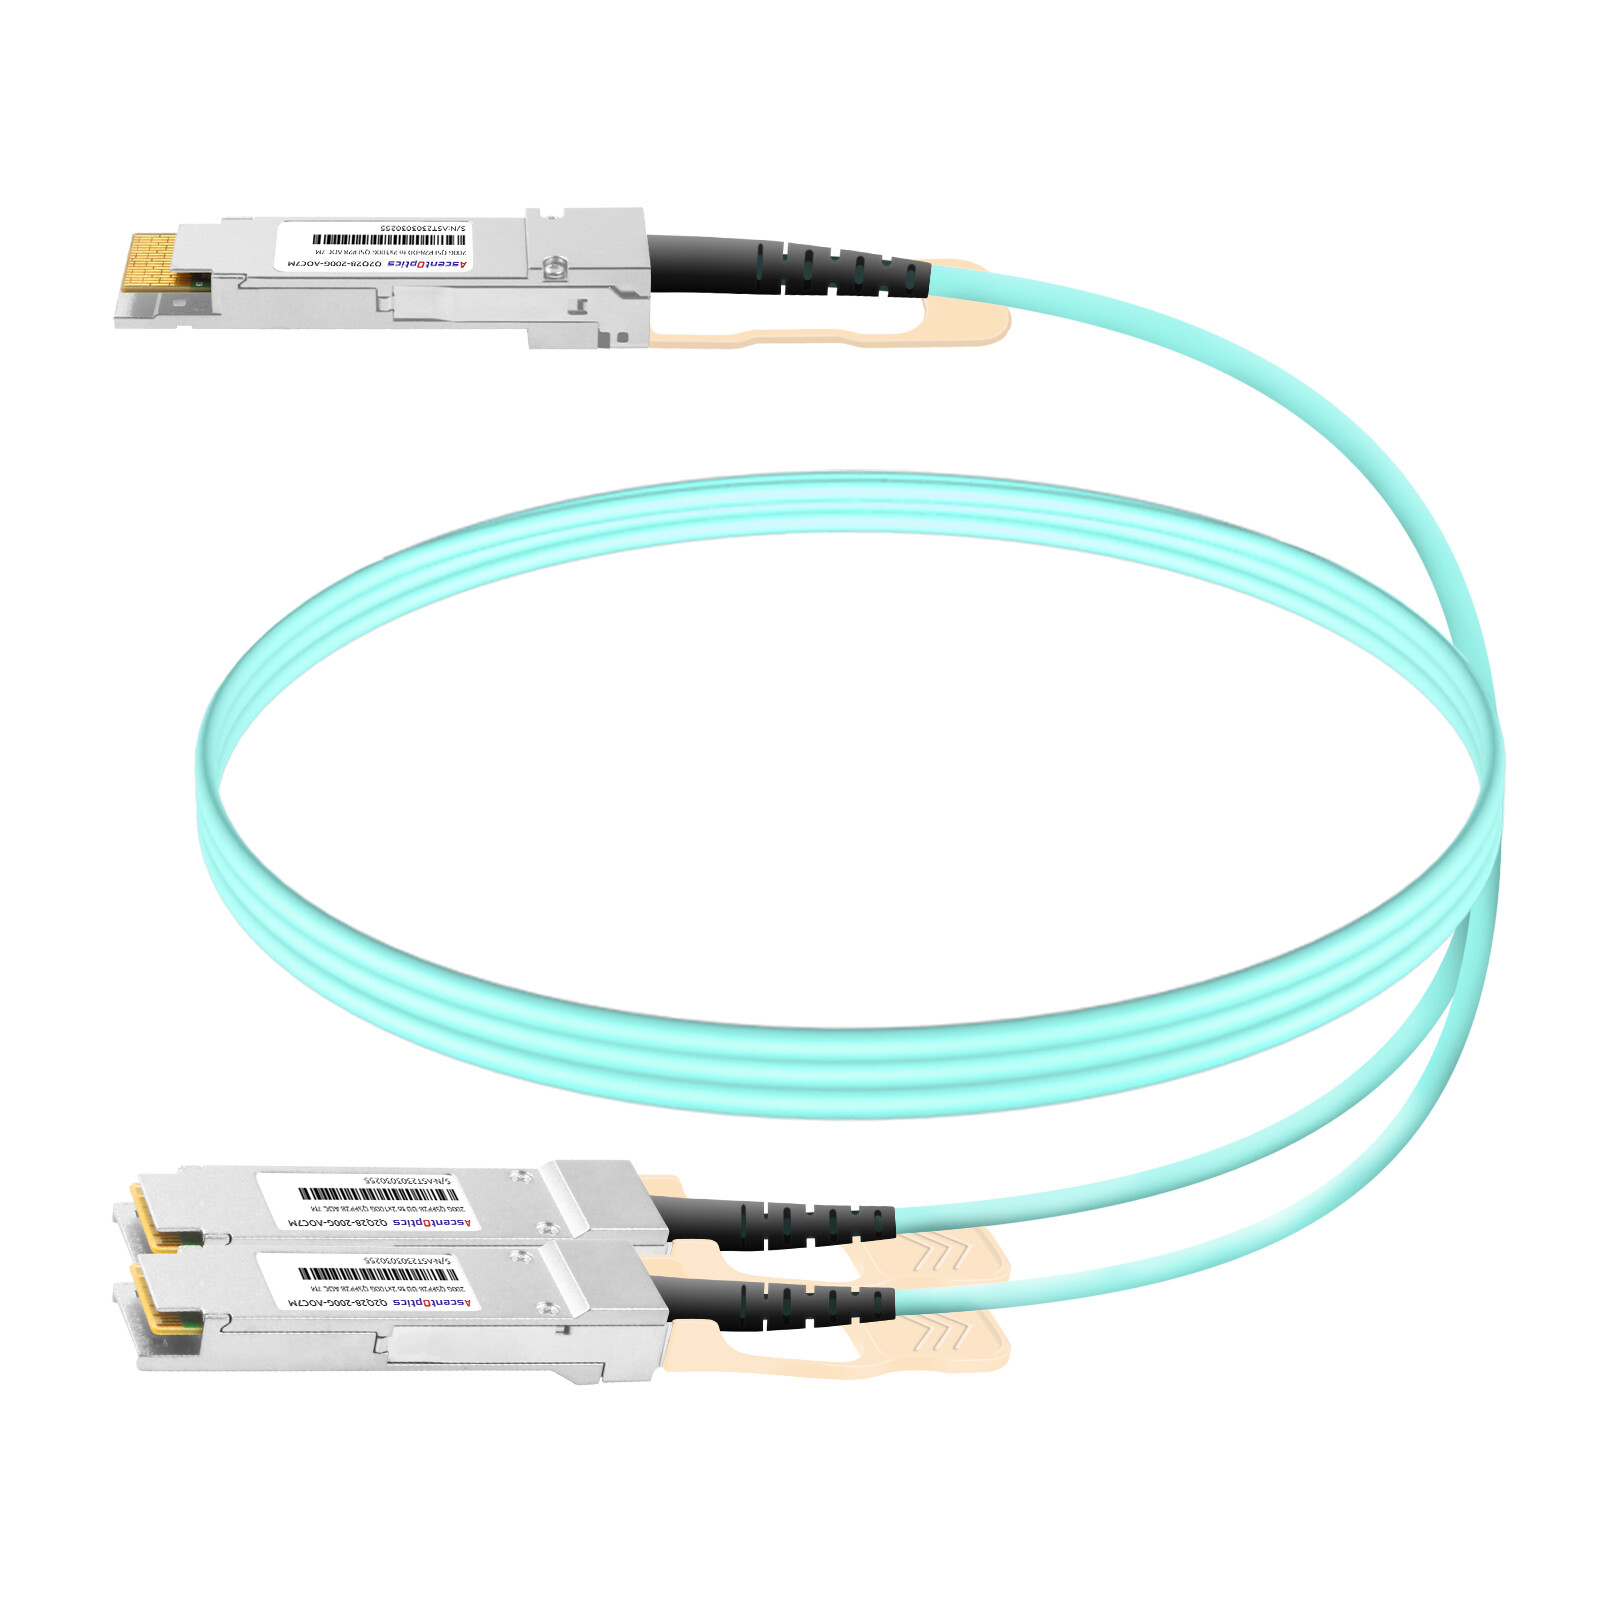 200G QSFP28-DD to 2x 100G QSFP28 Breakout AOC Cable,7 Meters